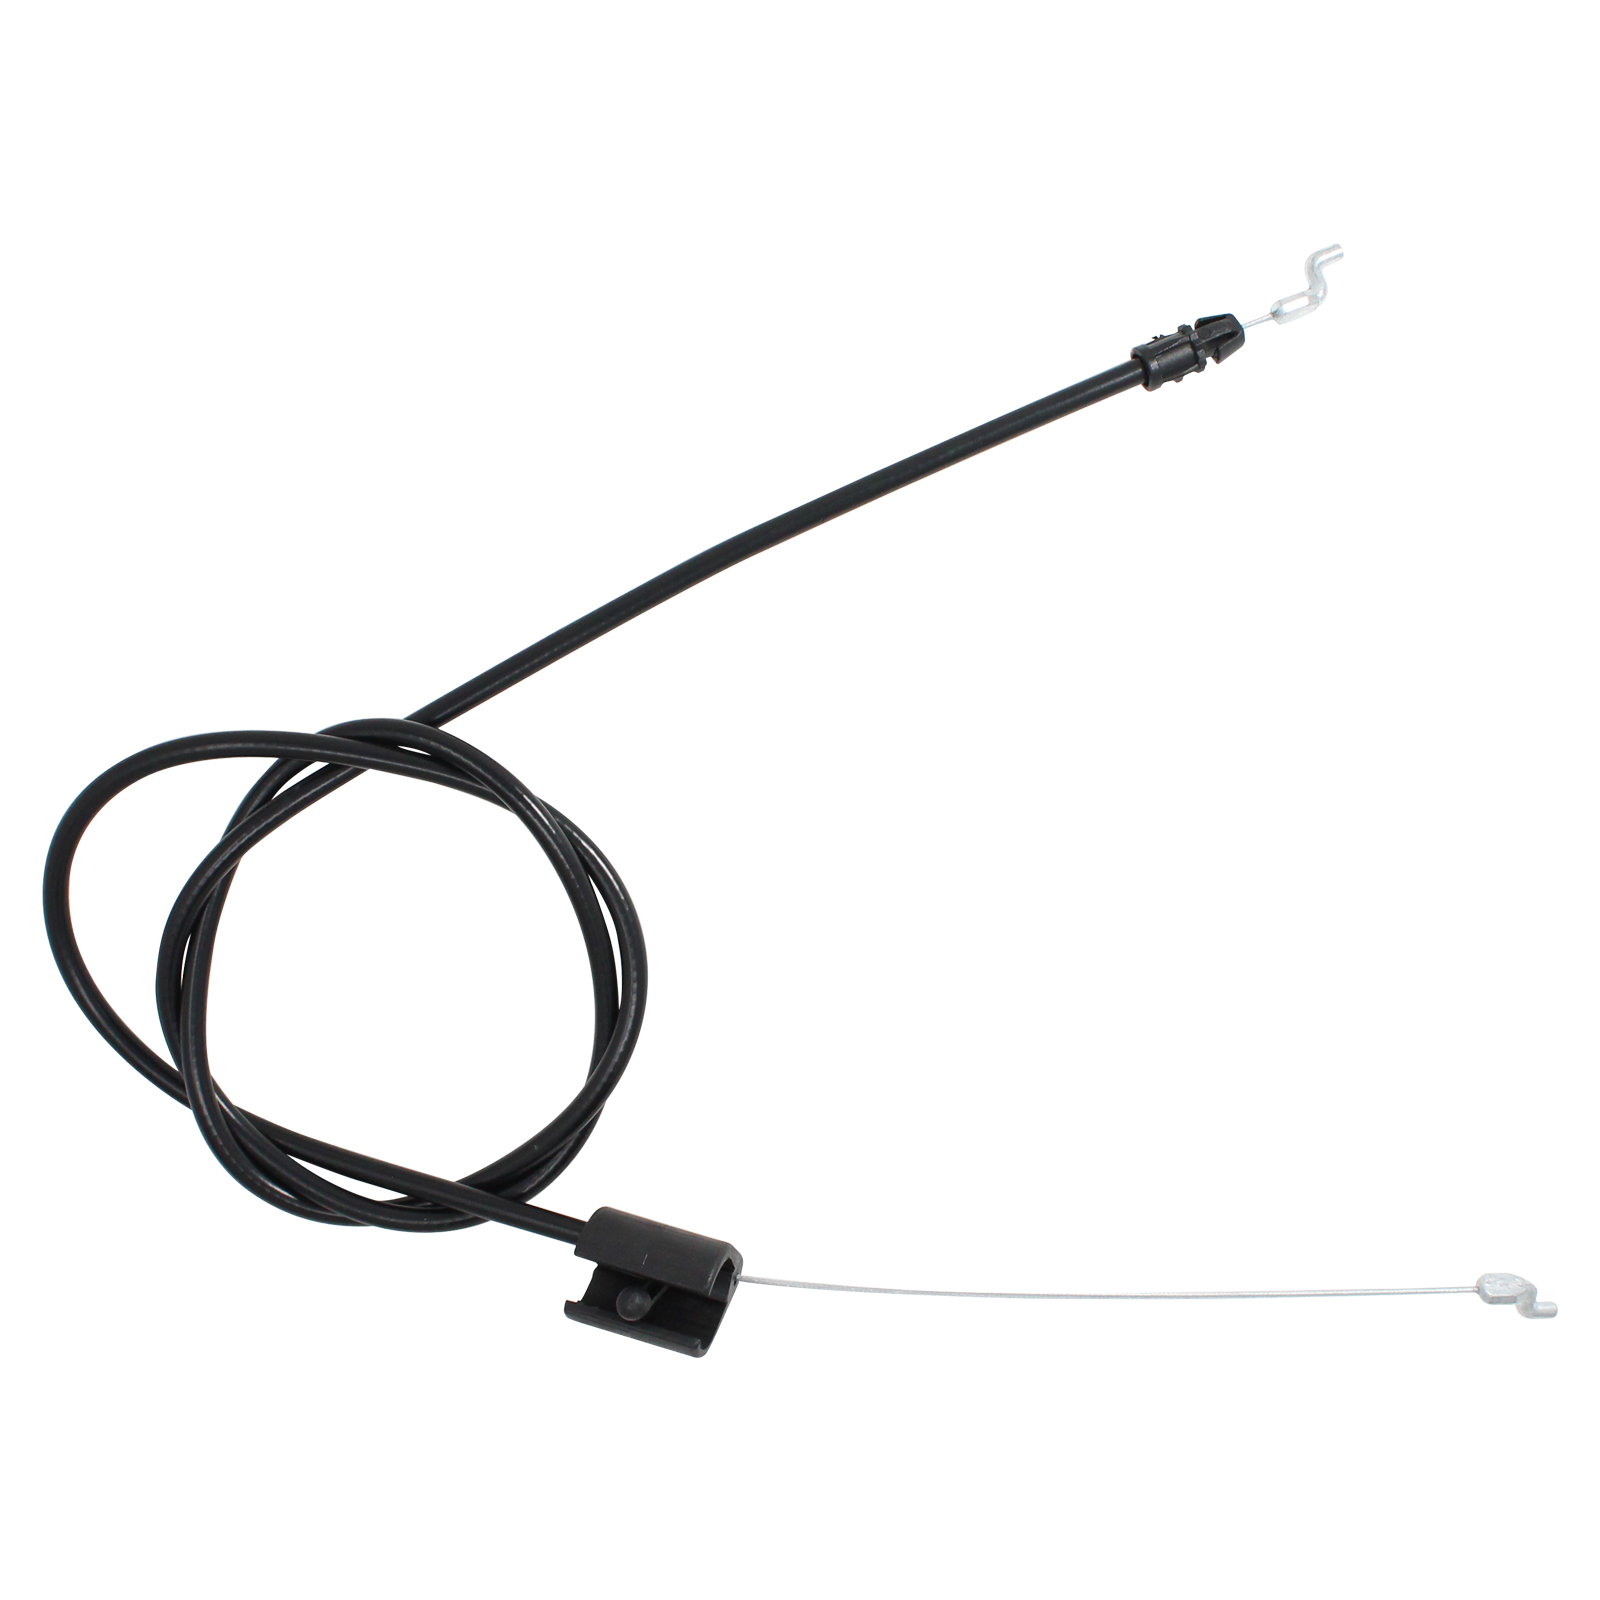 532176556 Engine Cable Replacement for Husqvarna ROTARY LAWN MOWER (96114000702) (2007-03) Lawn Mower: Consumer Walk Behind - Compatible with 176556 162778 Zone Control Cable - image 4 of 4